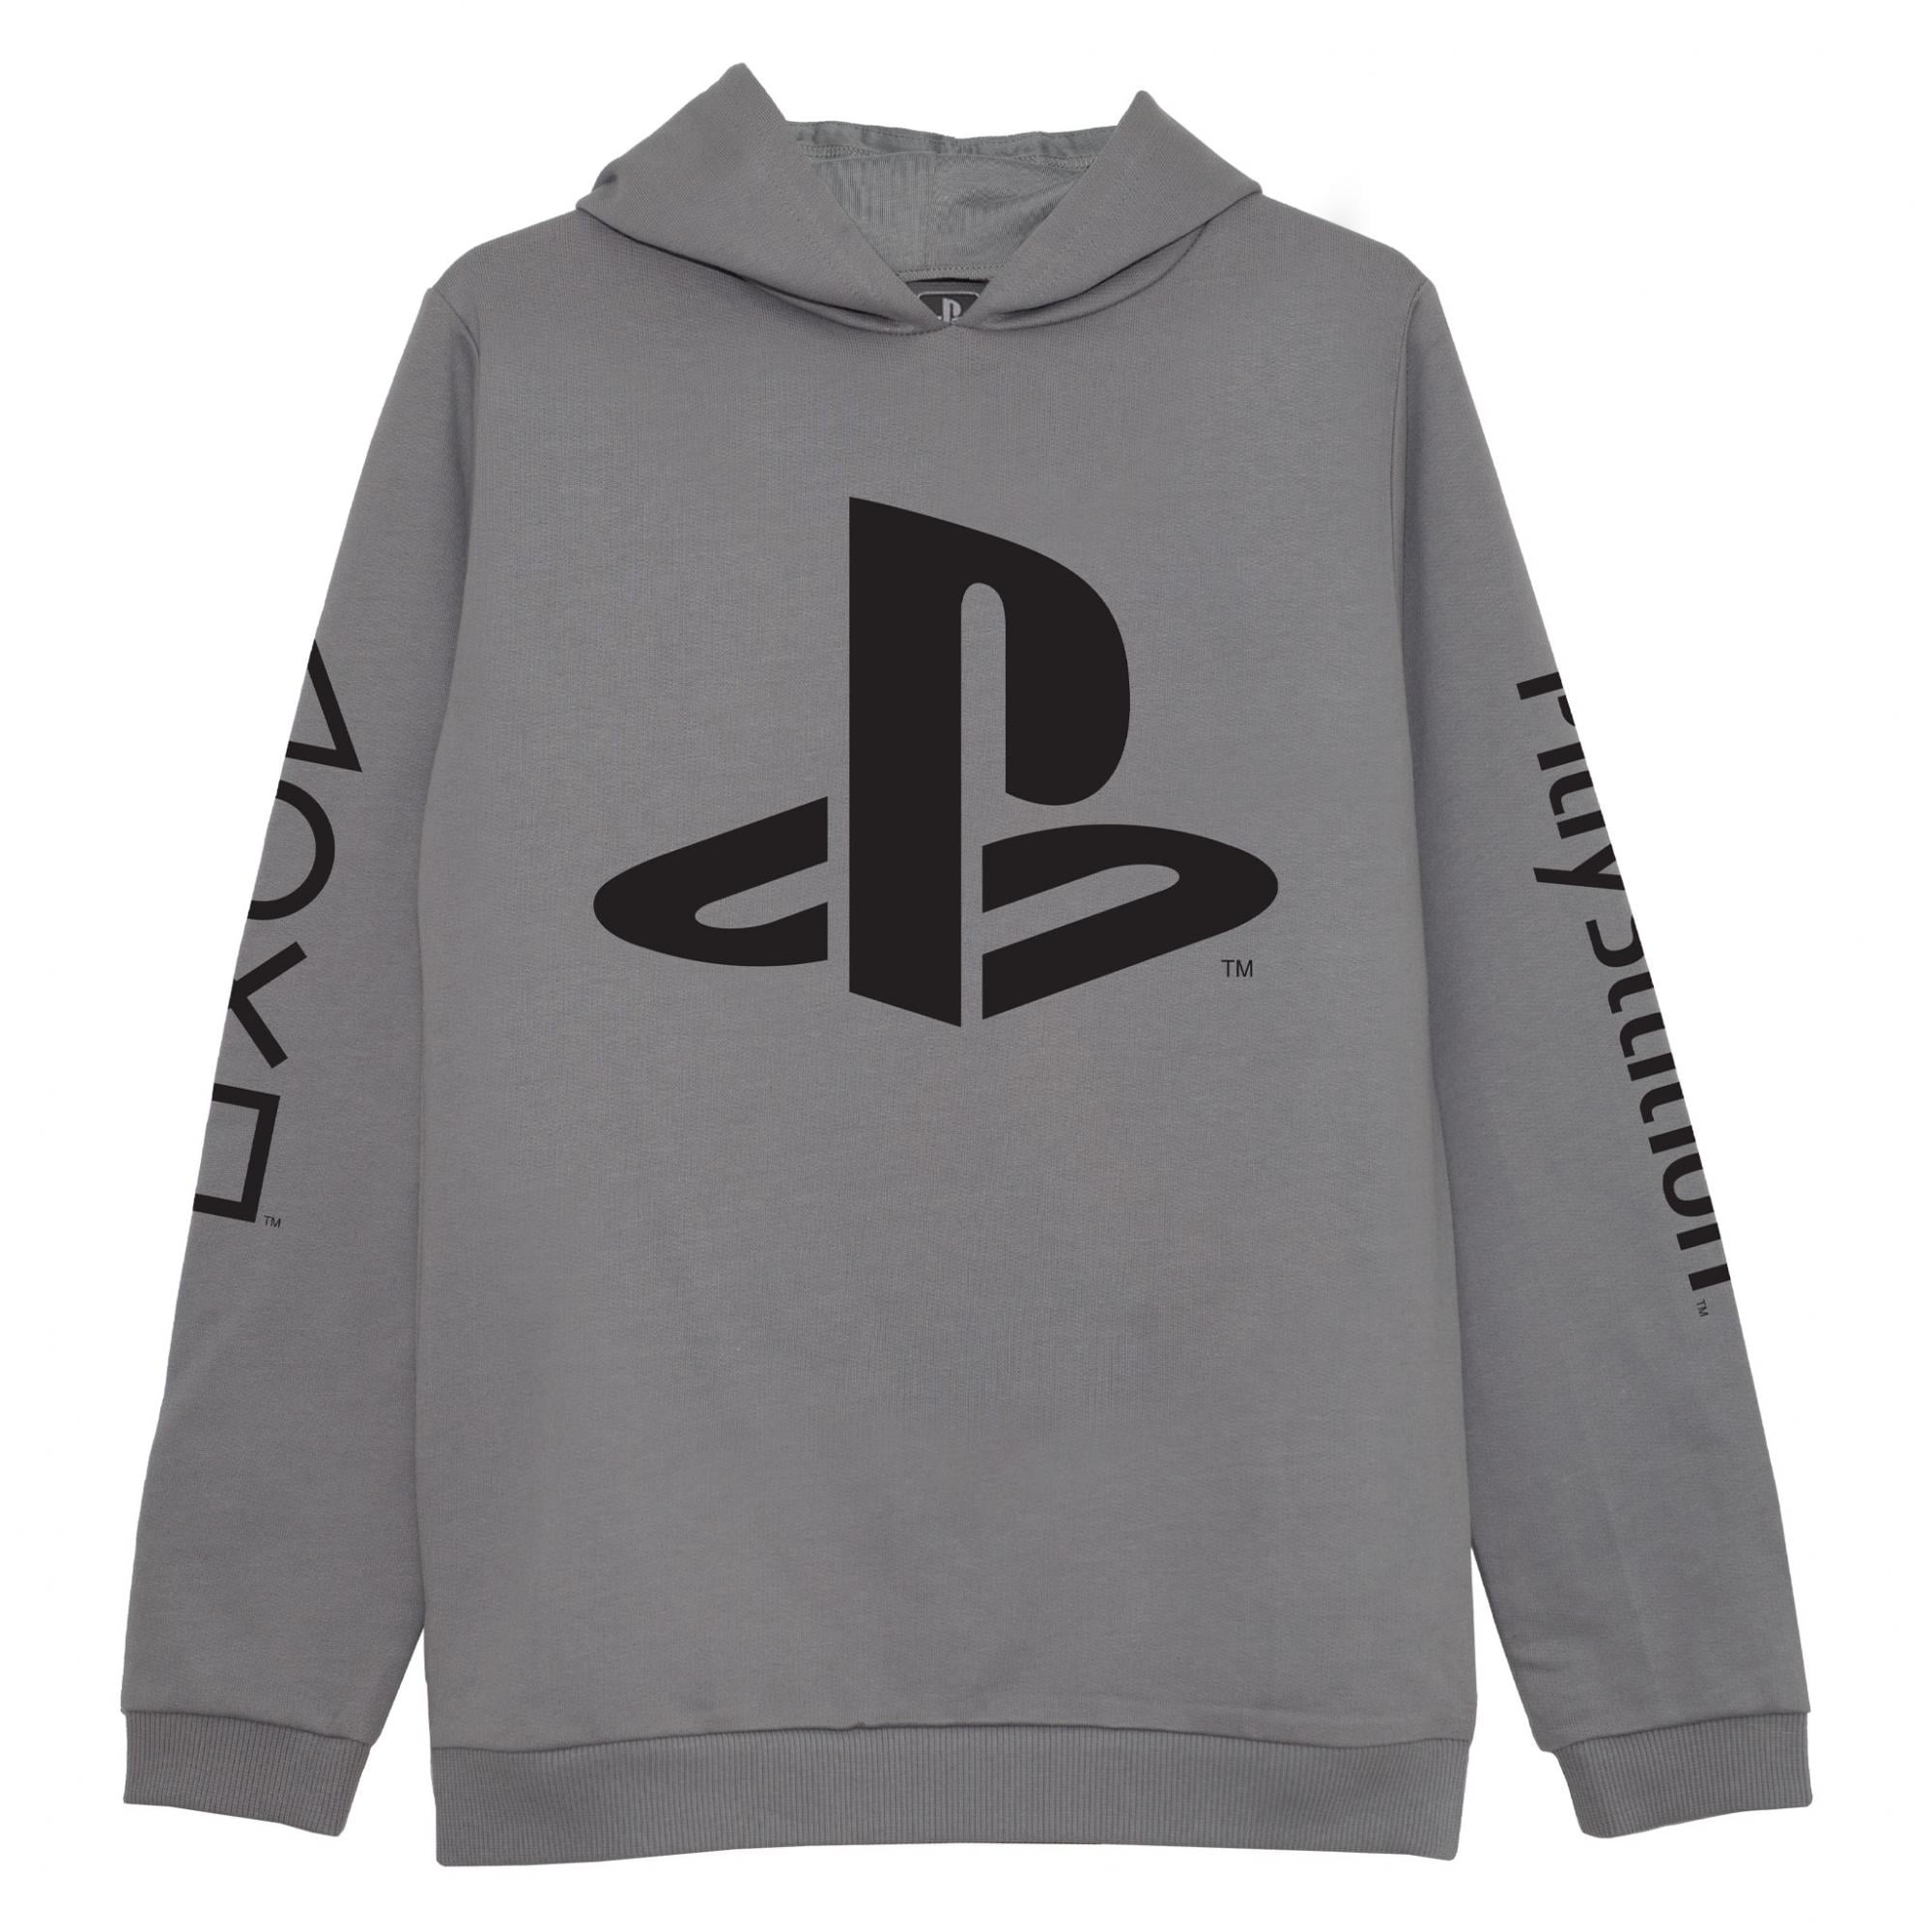 Playstation PS Logo Boys Pullover Hoodie Ages 5-15 Boys Tops Official Merchandise PS4 PS5 Gamer Gifts Kids Gaming Birthday Gift Idea Childrens Clothes